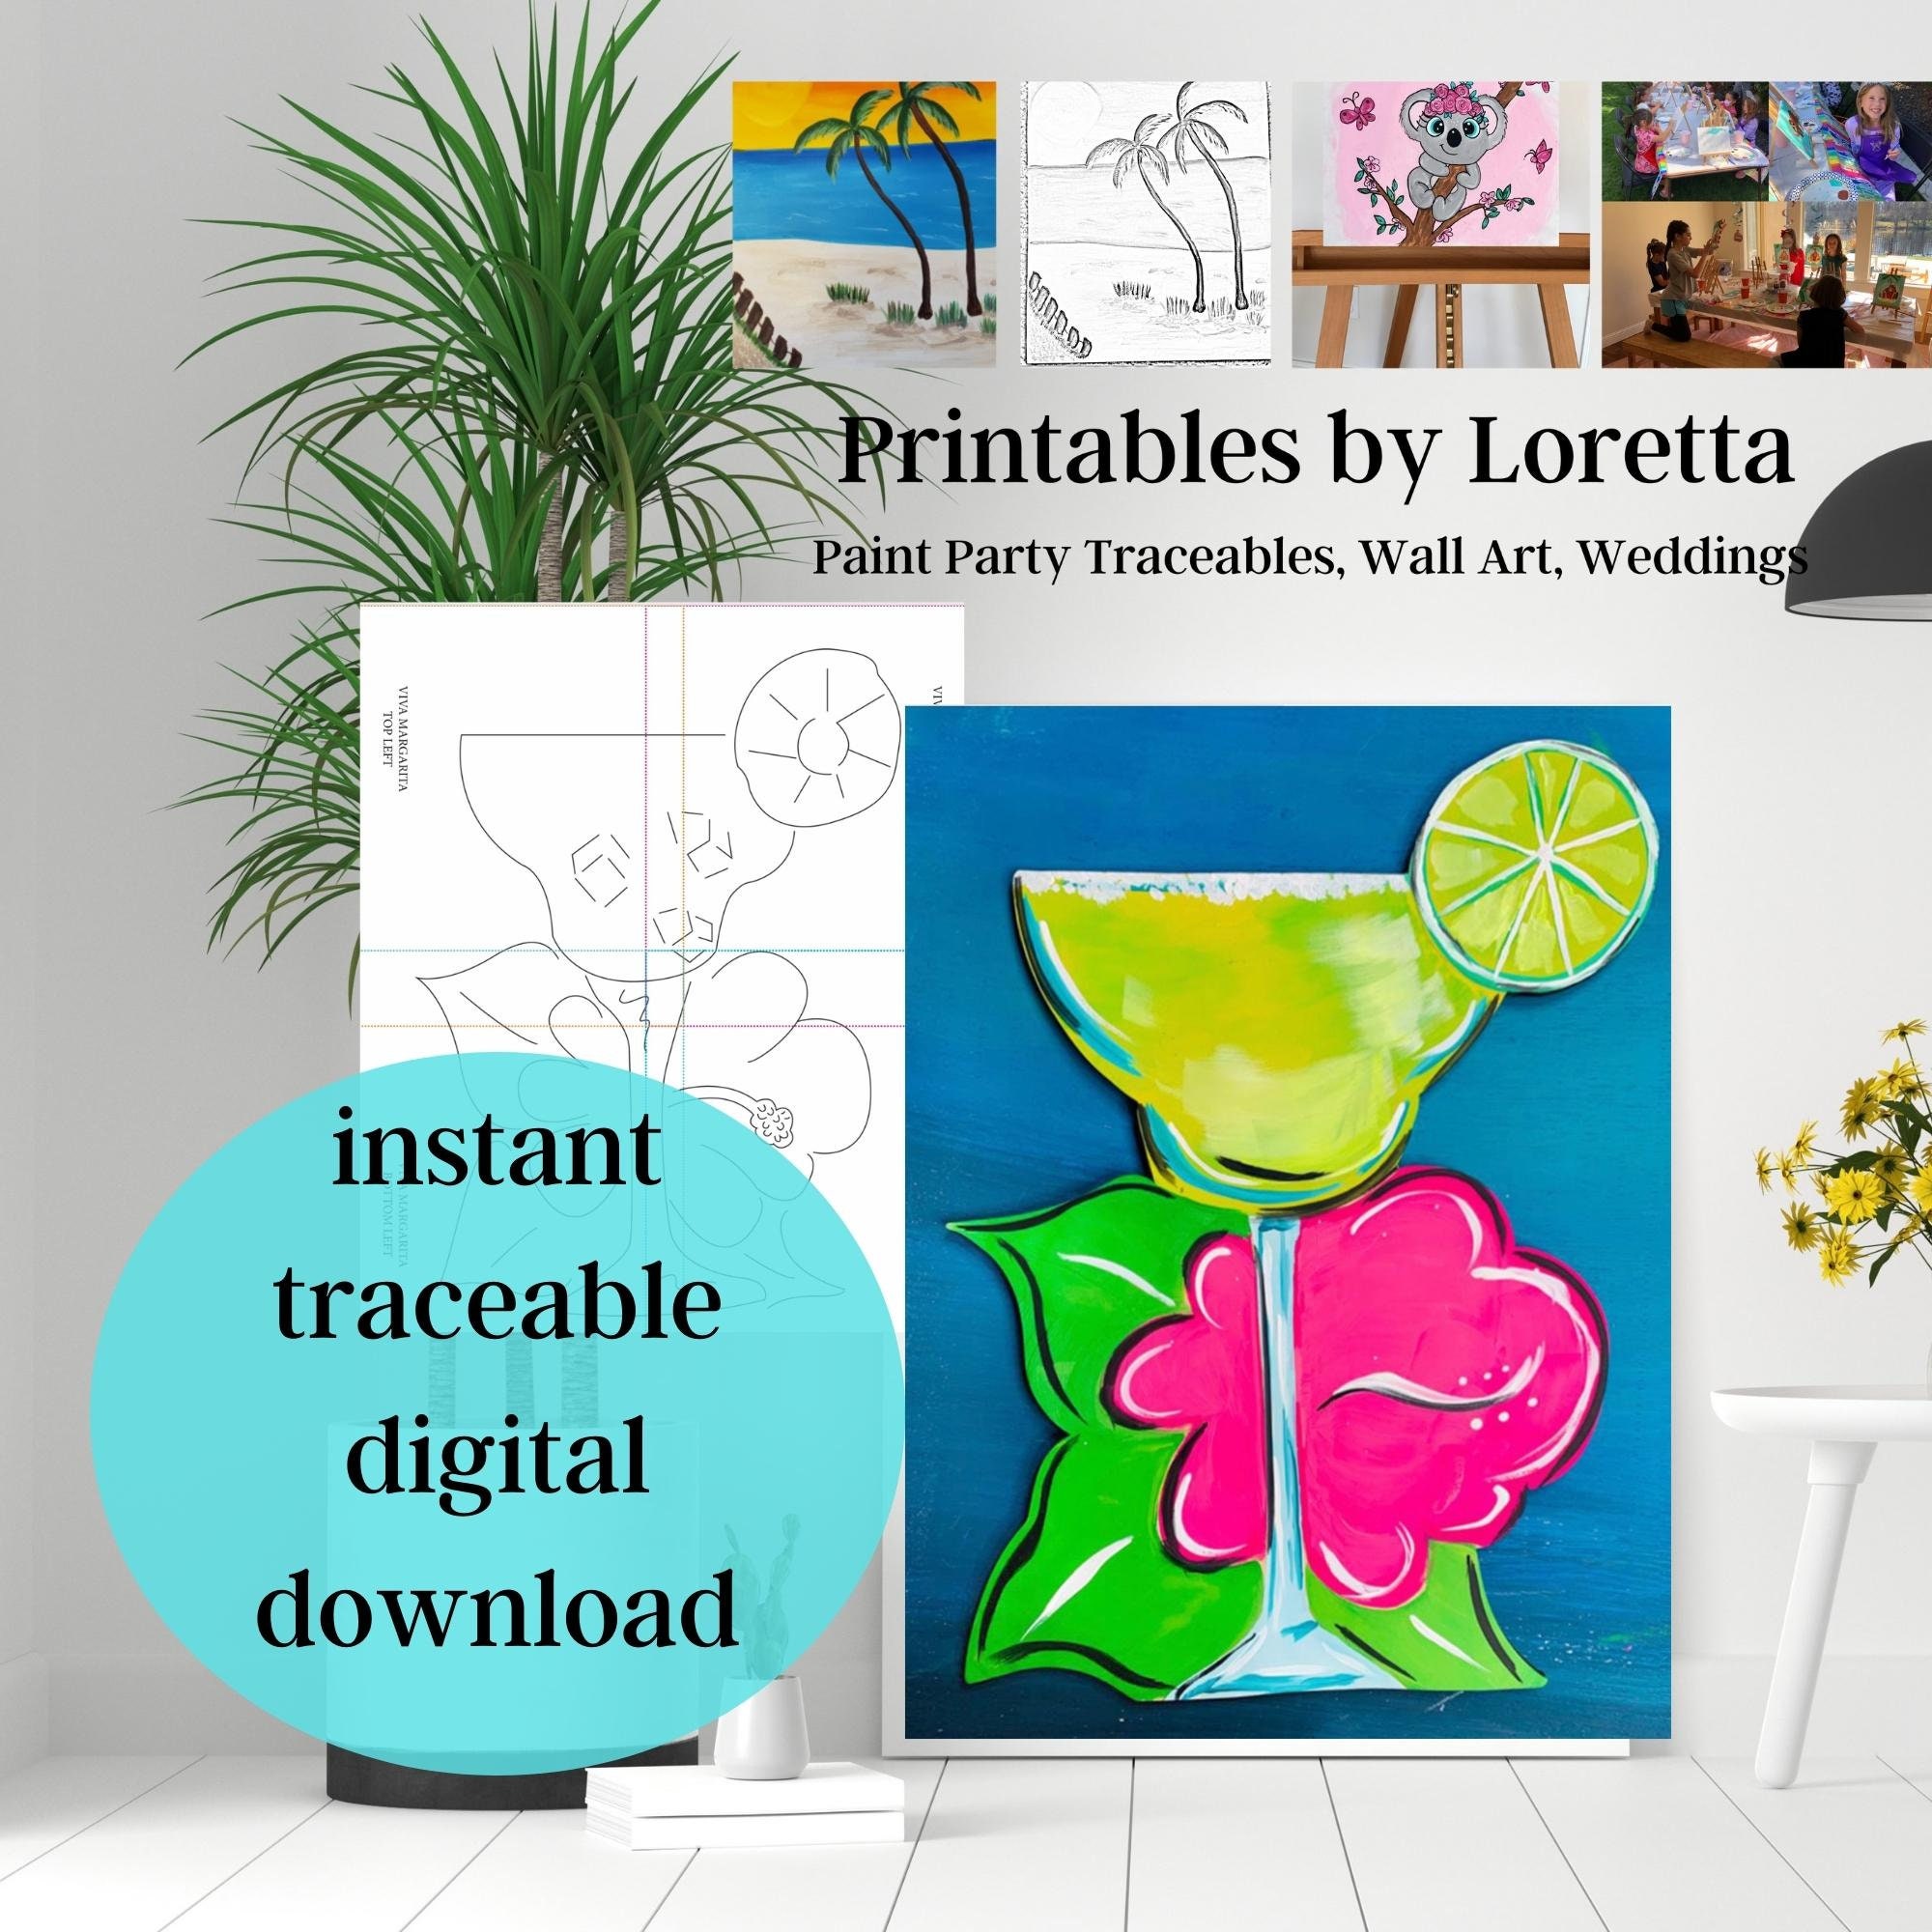 DIY Canvas Art Kit for Adults Beginner 11x14 inch-Colorful, Acrylic Paint,  Margarita On The Beach